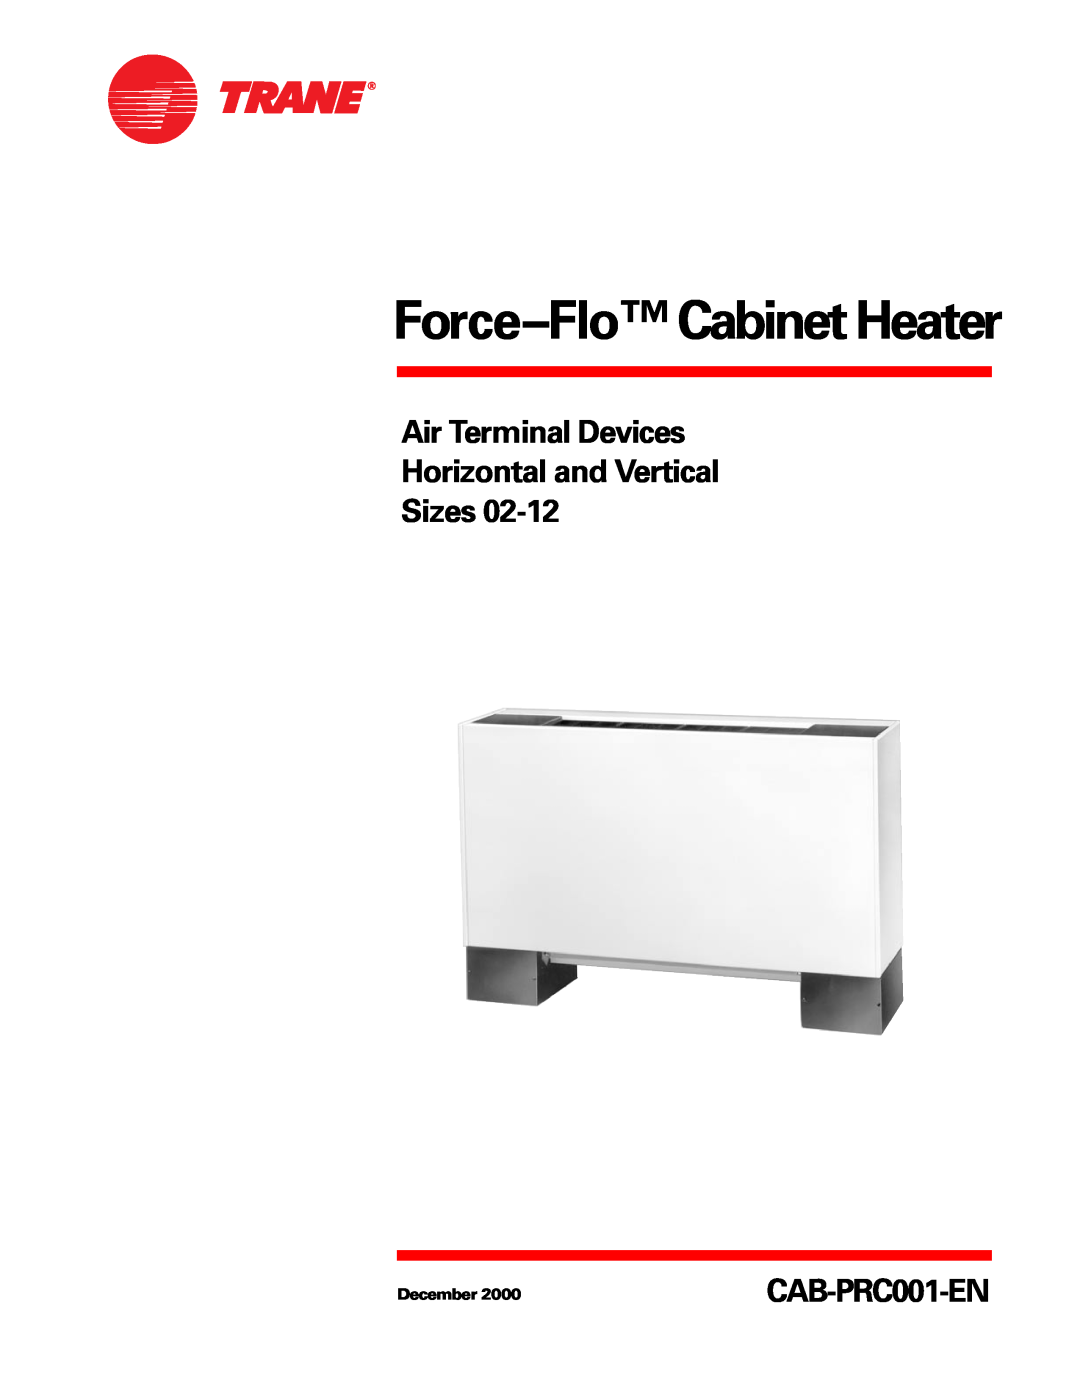 Trane CAB-PRC001-EN manual Force-FloCabinet Heater, Air Terminal Devices Horizontal and Vertical, Sizes 